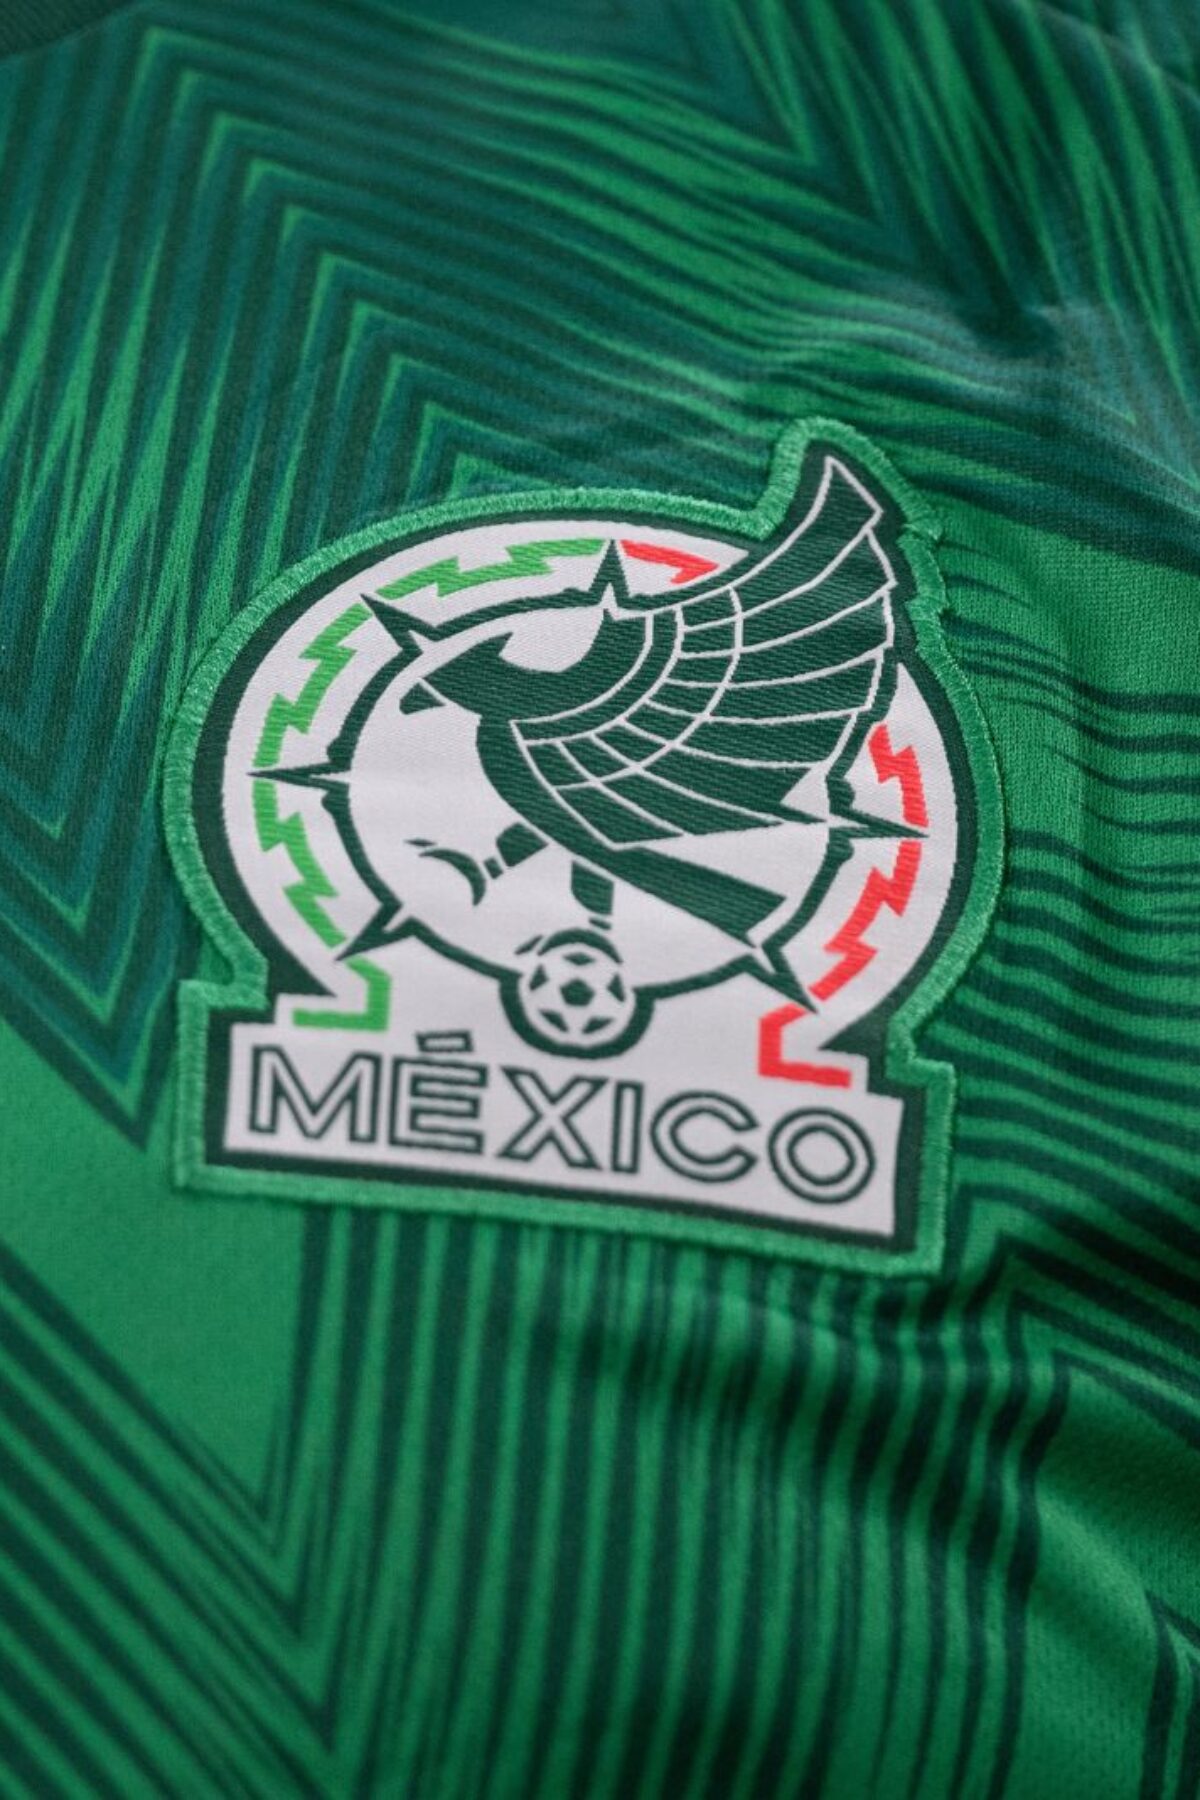 LUSAIL CITY, QATAR - NOVEMBER 26: A close up view of a fan's Mexico jersey during the FIFA World Cup Qatar 2022 Group C match between Argentina and Mexico at Lusail Stadium on November 26, 2022 in Lusail City, Qatar. Mexico's team is often referred to as El Tri (Photo by Visionhaus/Getty Images)